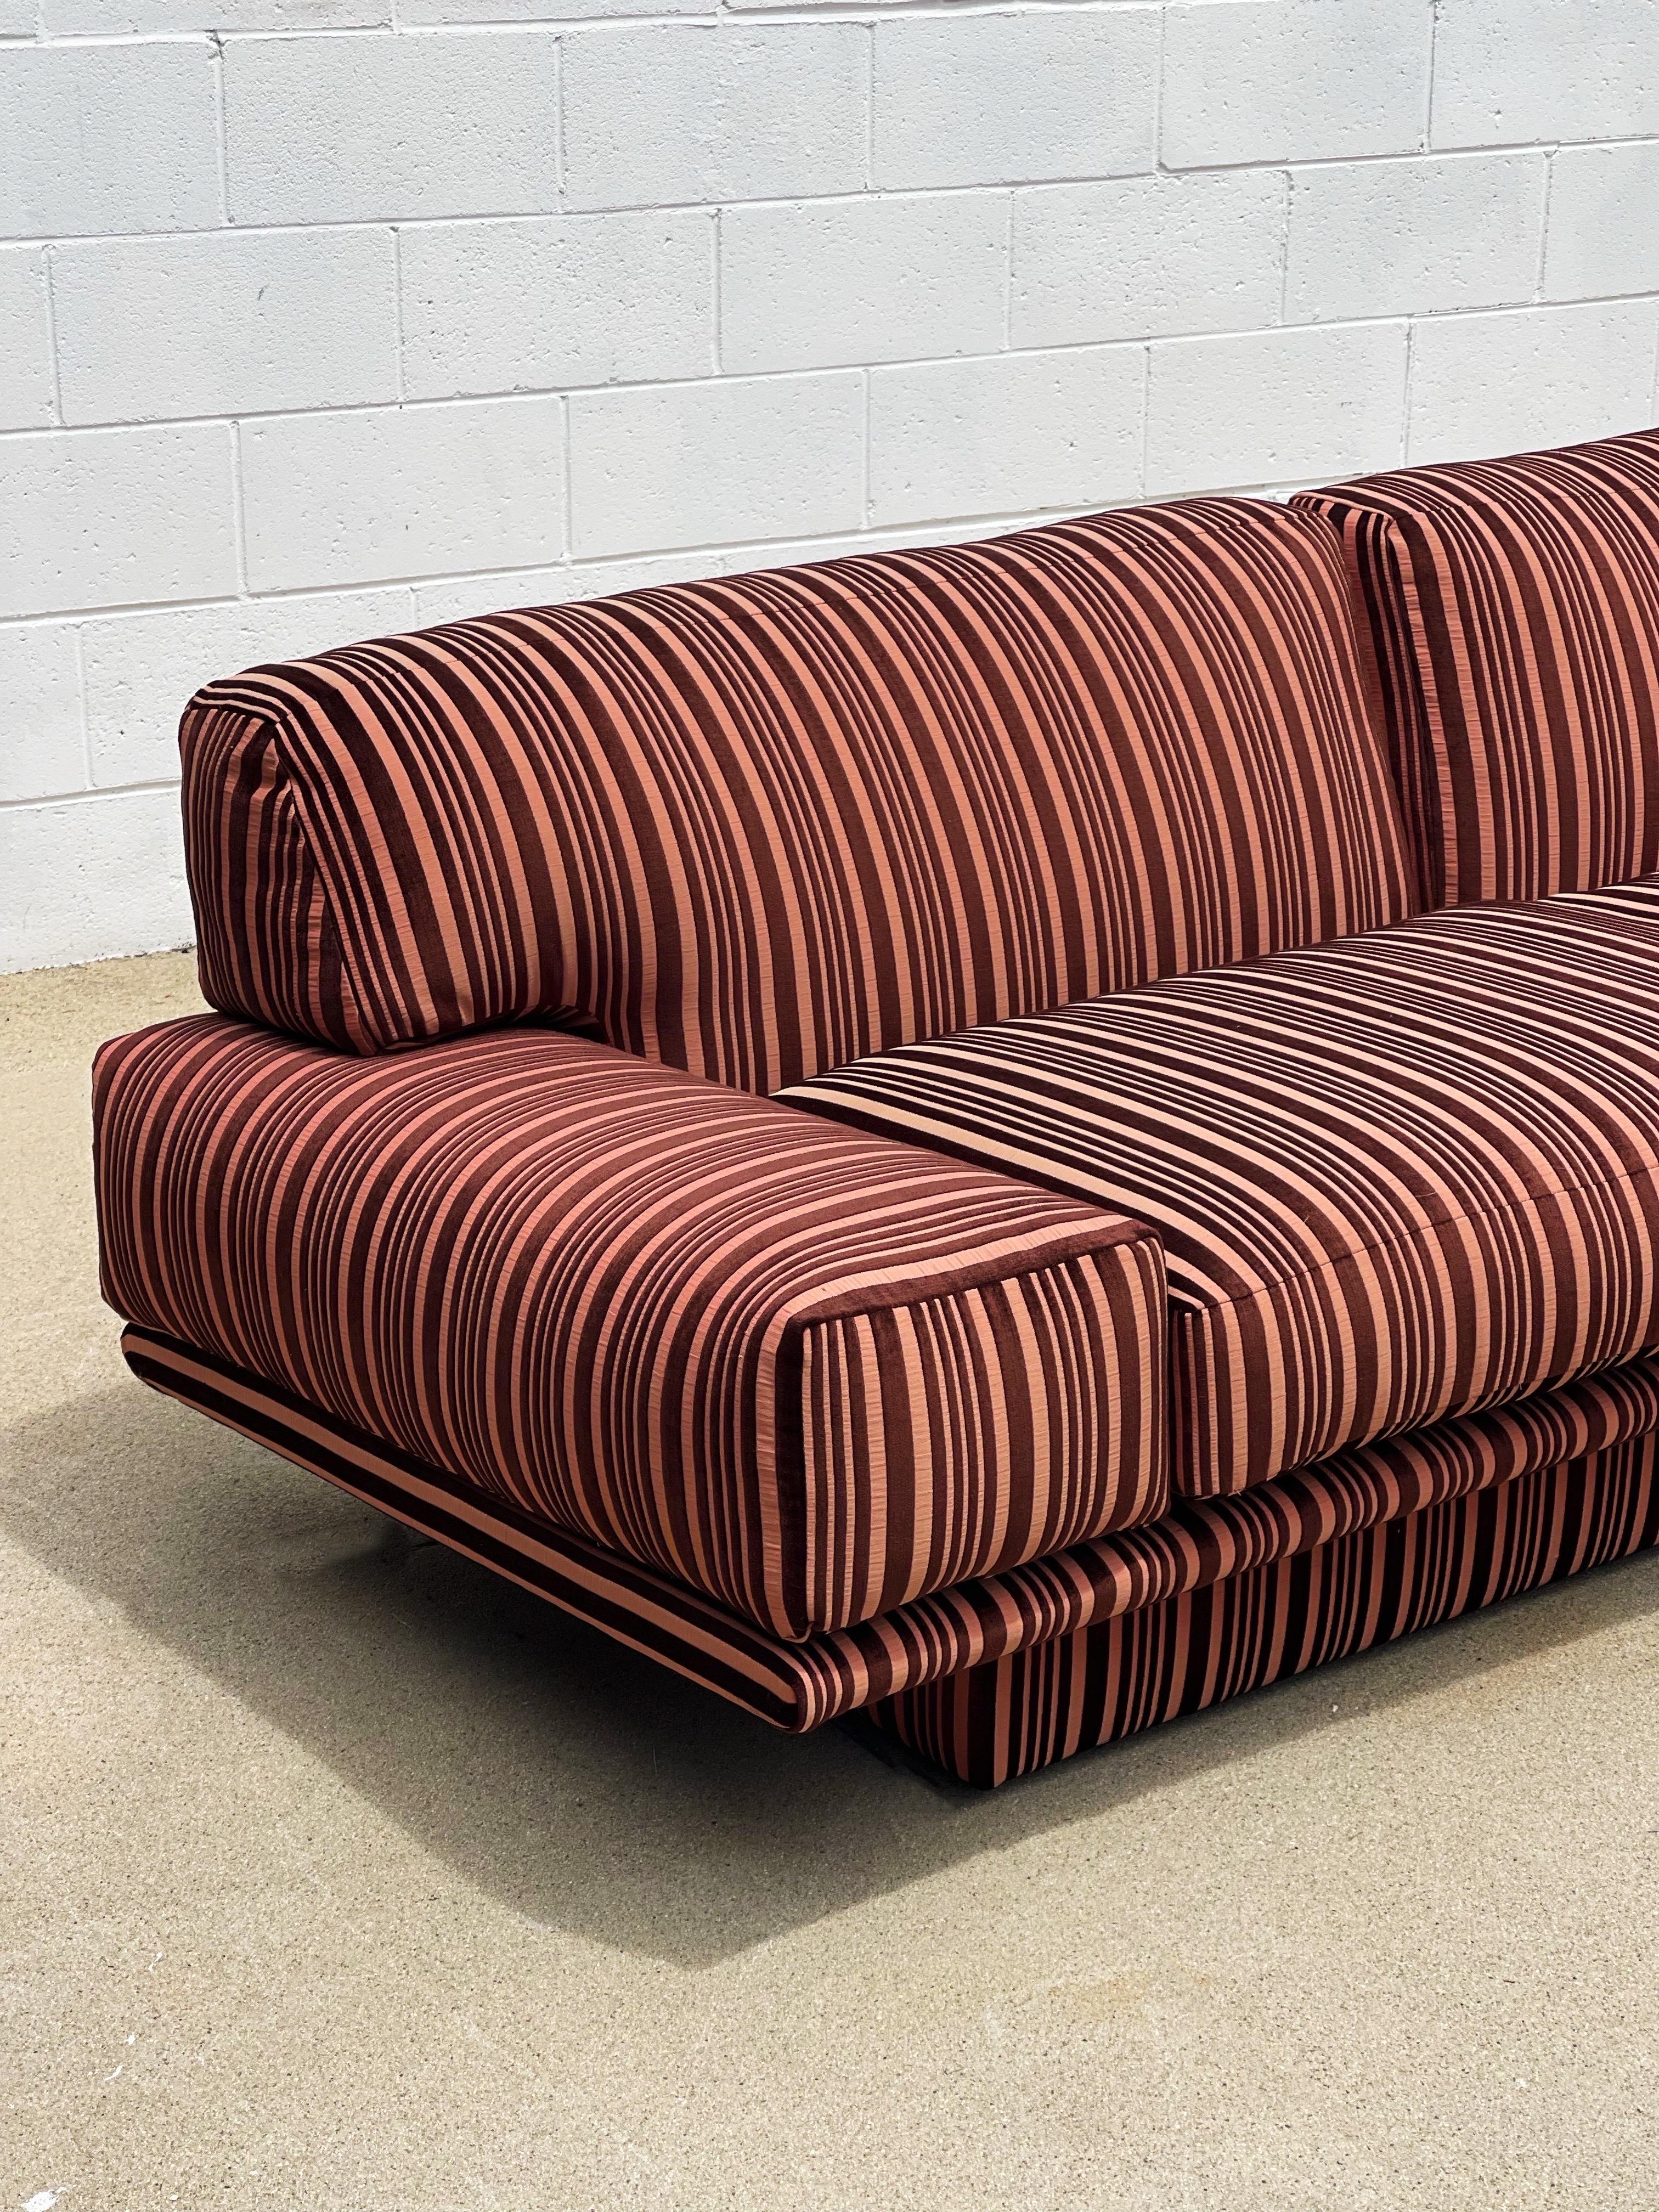 Hand-Crafted 1970s Pink Striped Floating Sofa 